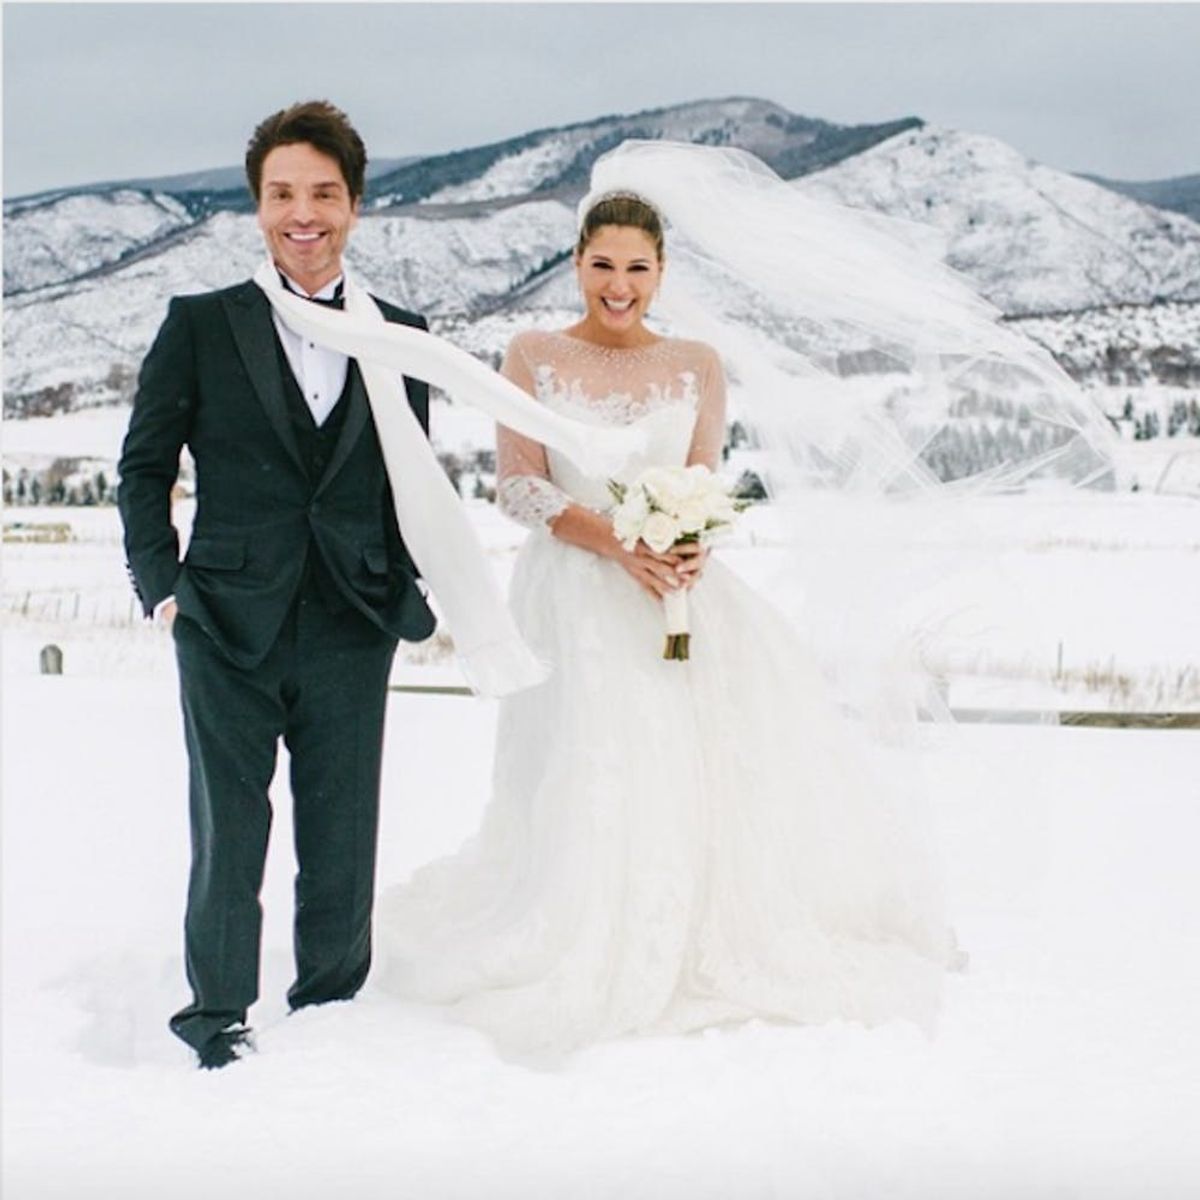 10 Celebrity Weddings That Prove Winter Nuptials Are Worth the Chill